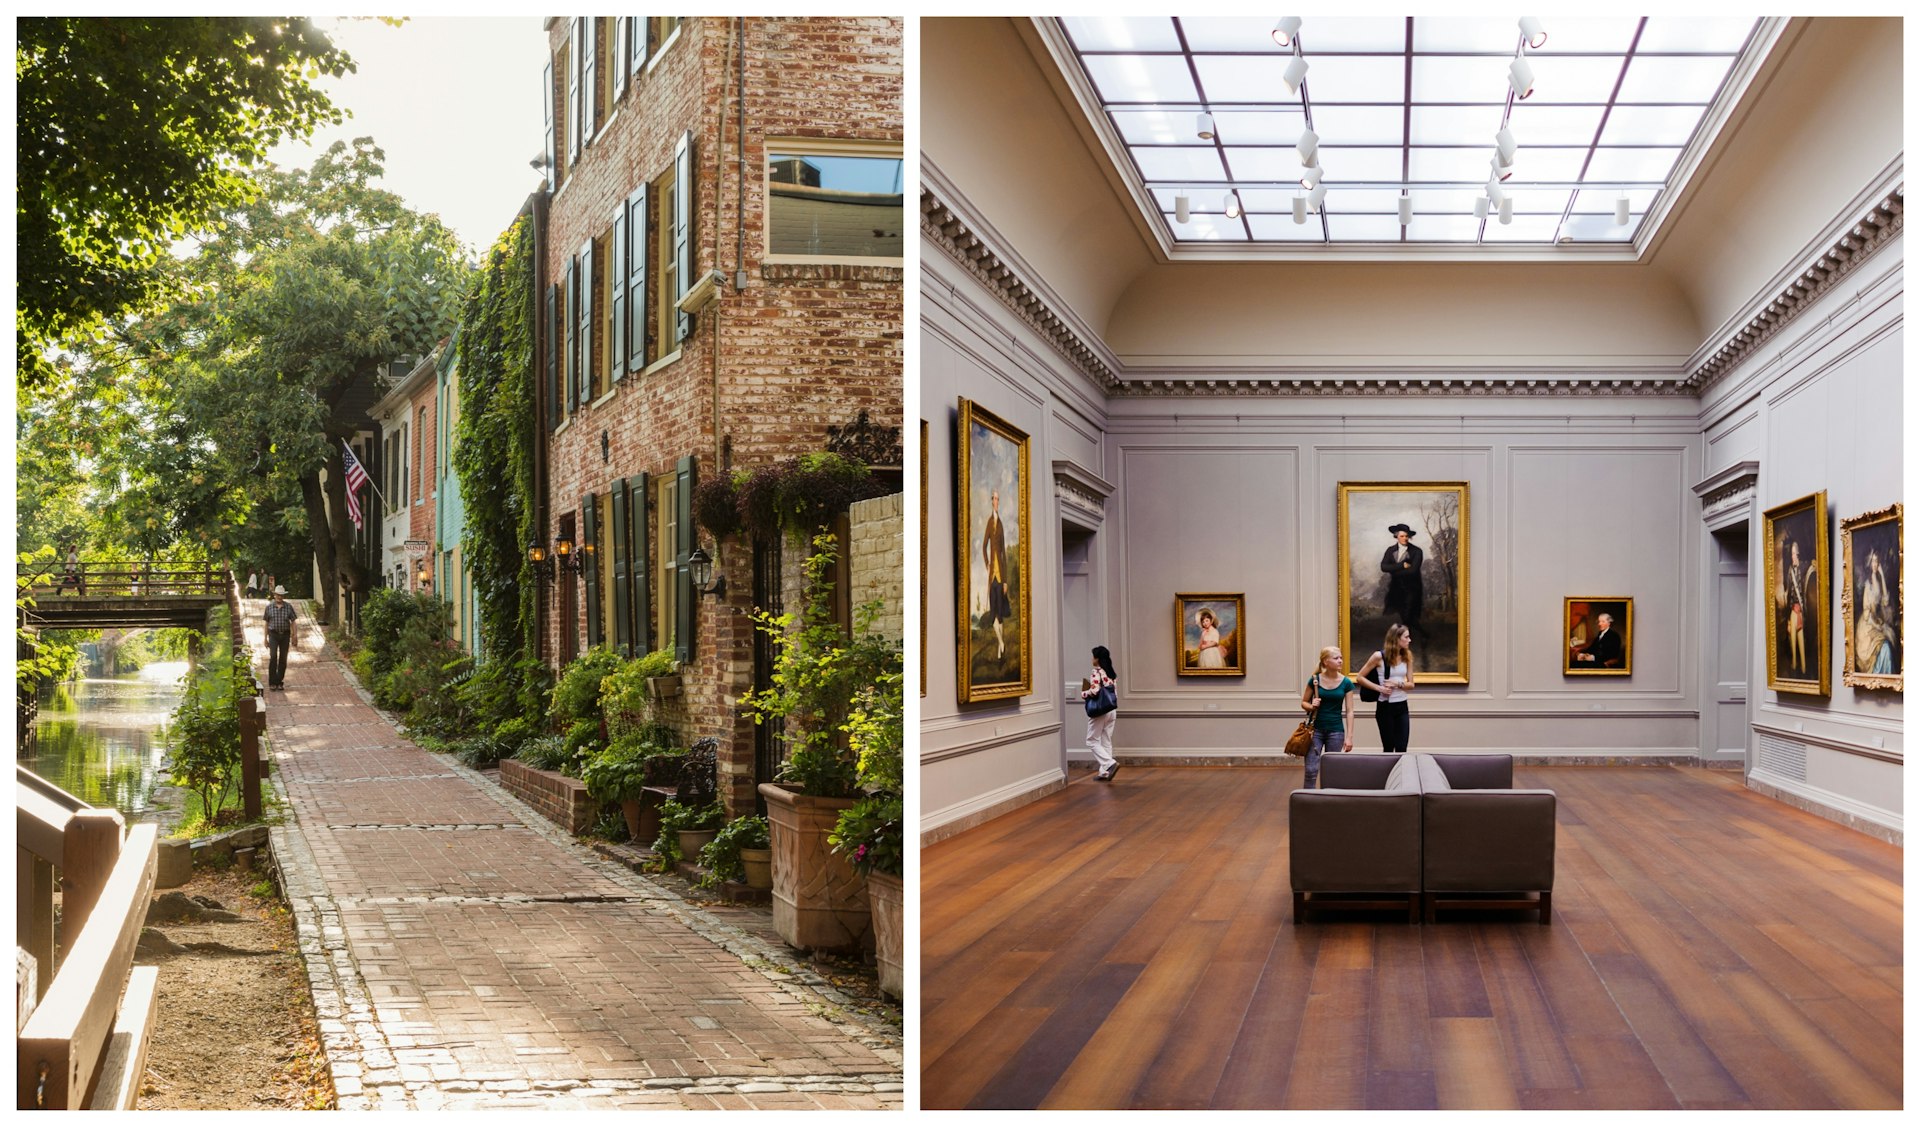 Left: Walking along the C&O Canal in Georgetown, Washington, DC; Right: Exploring the National Gallery